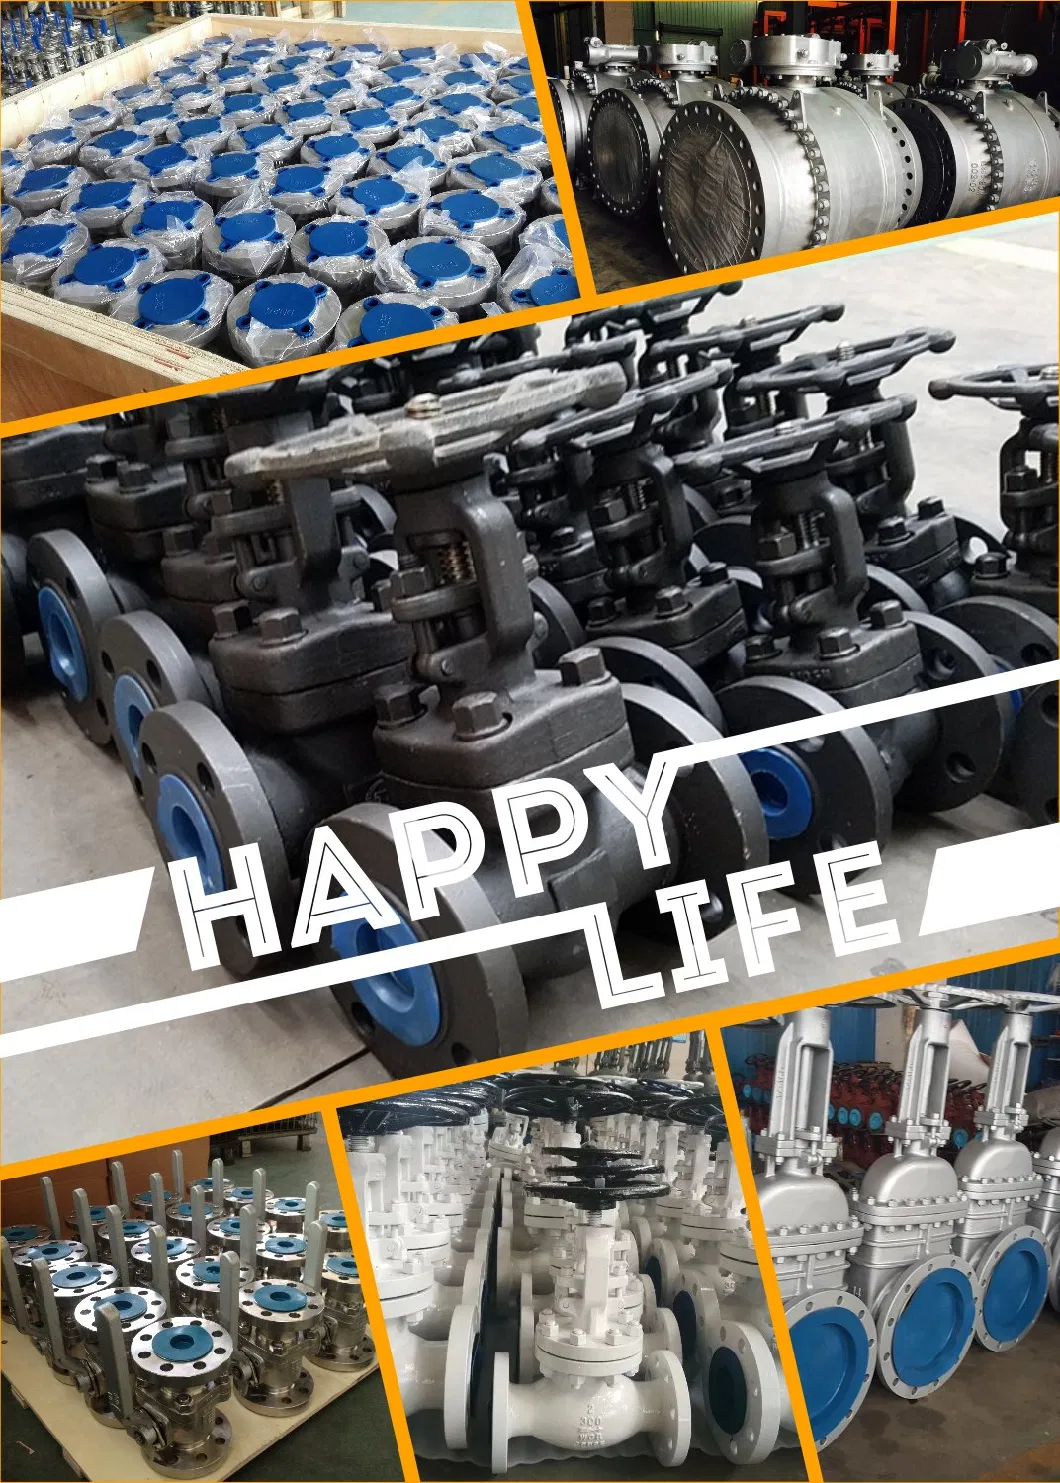 DIN//API600/GB Pn16-40 Wheel/Bevel Gear/Electric/Pneumatic Stainless Steel/Carbon Steel/304/316/Weld /Flange End OS&Y Non Rising Stem Gate Valve